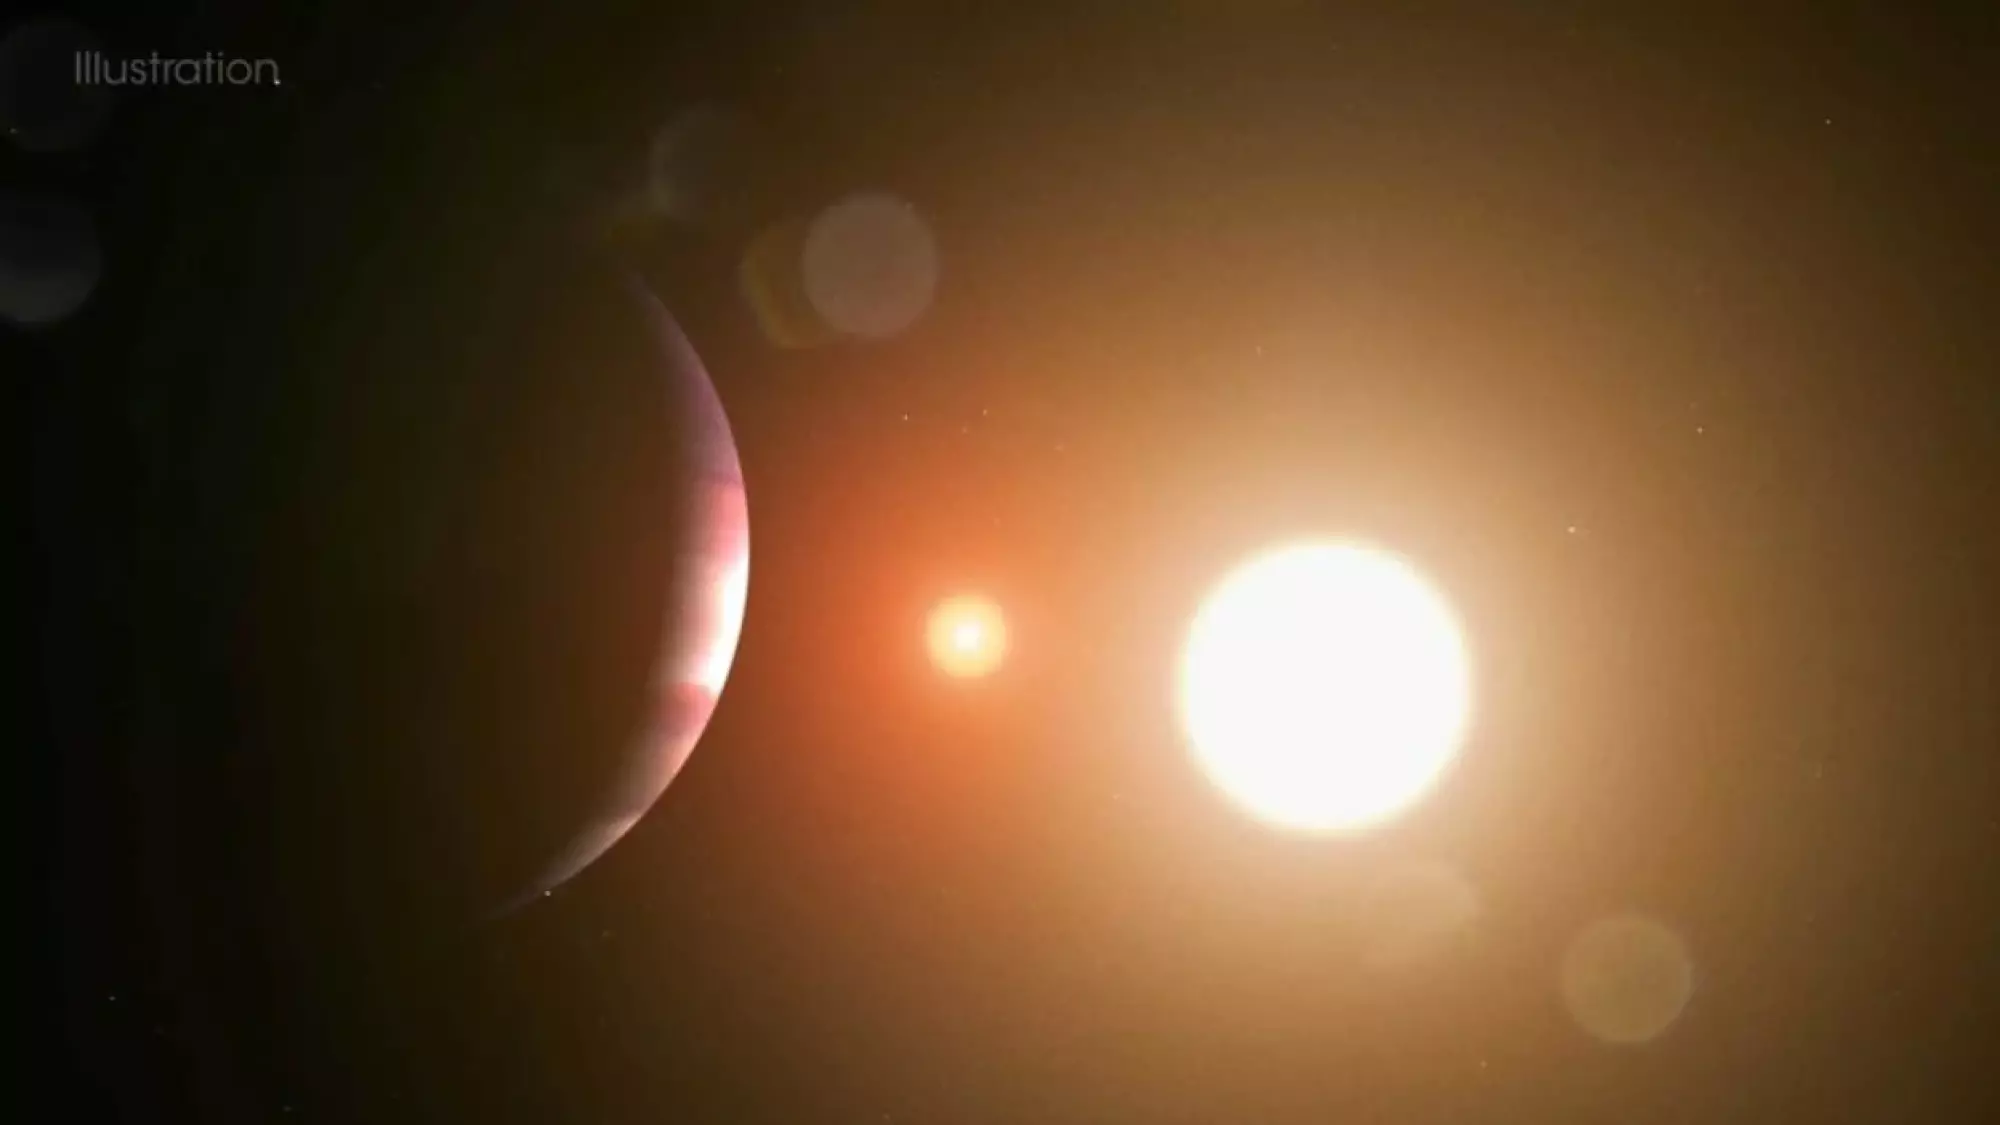 A planet orbiting two stars